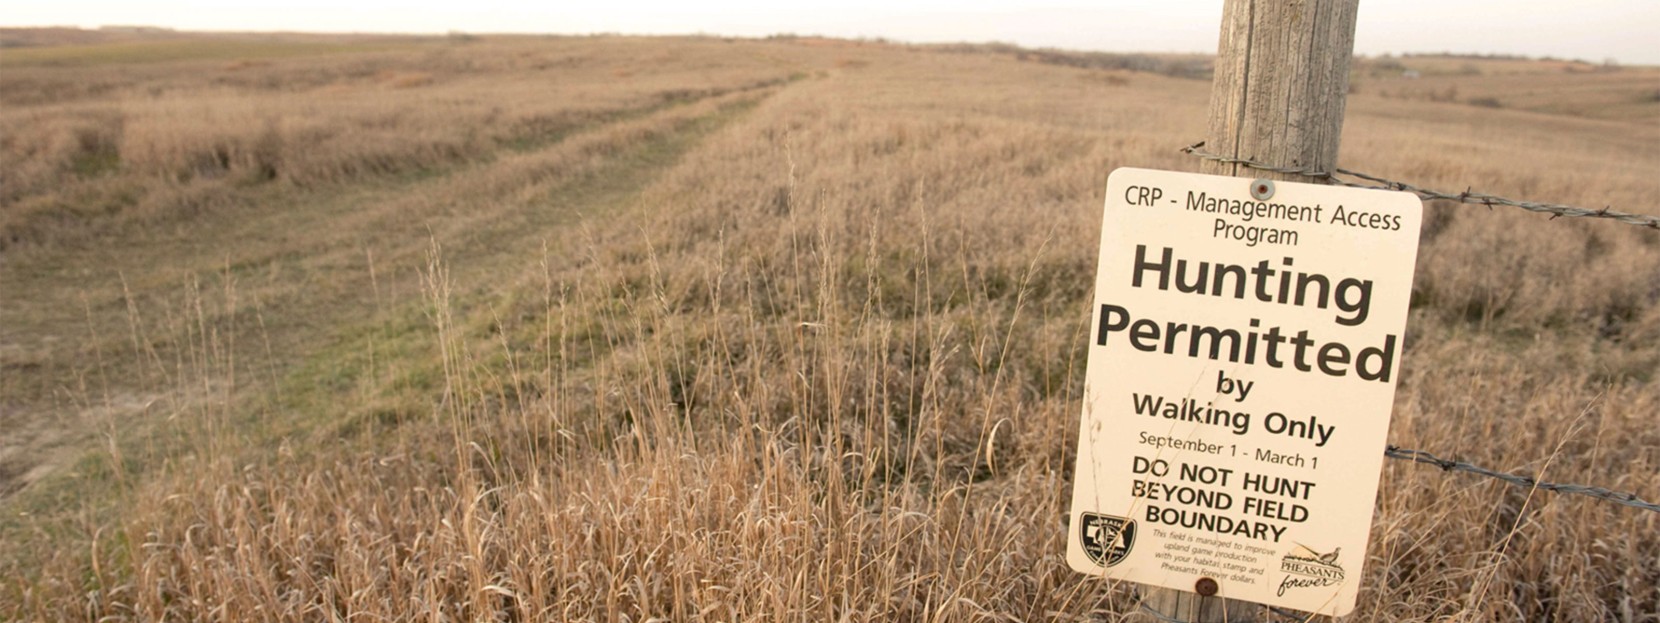 A close-up of a Hunting Permitted sign in a field.